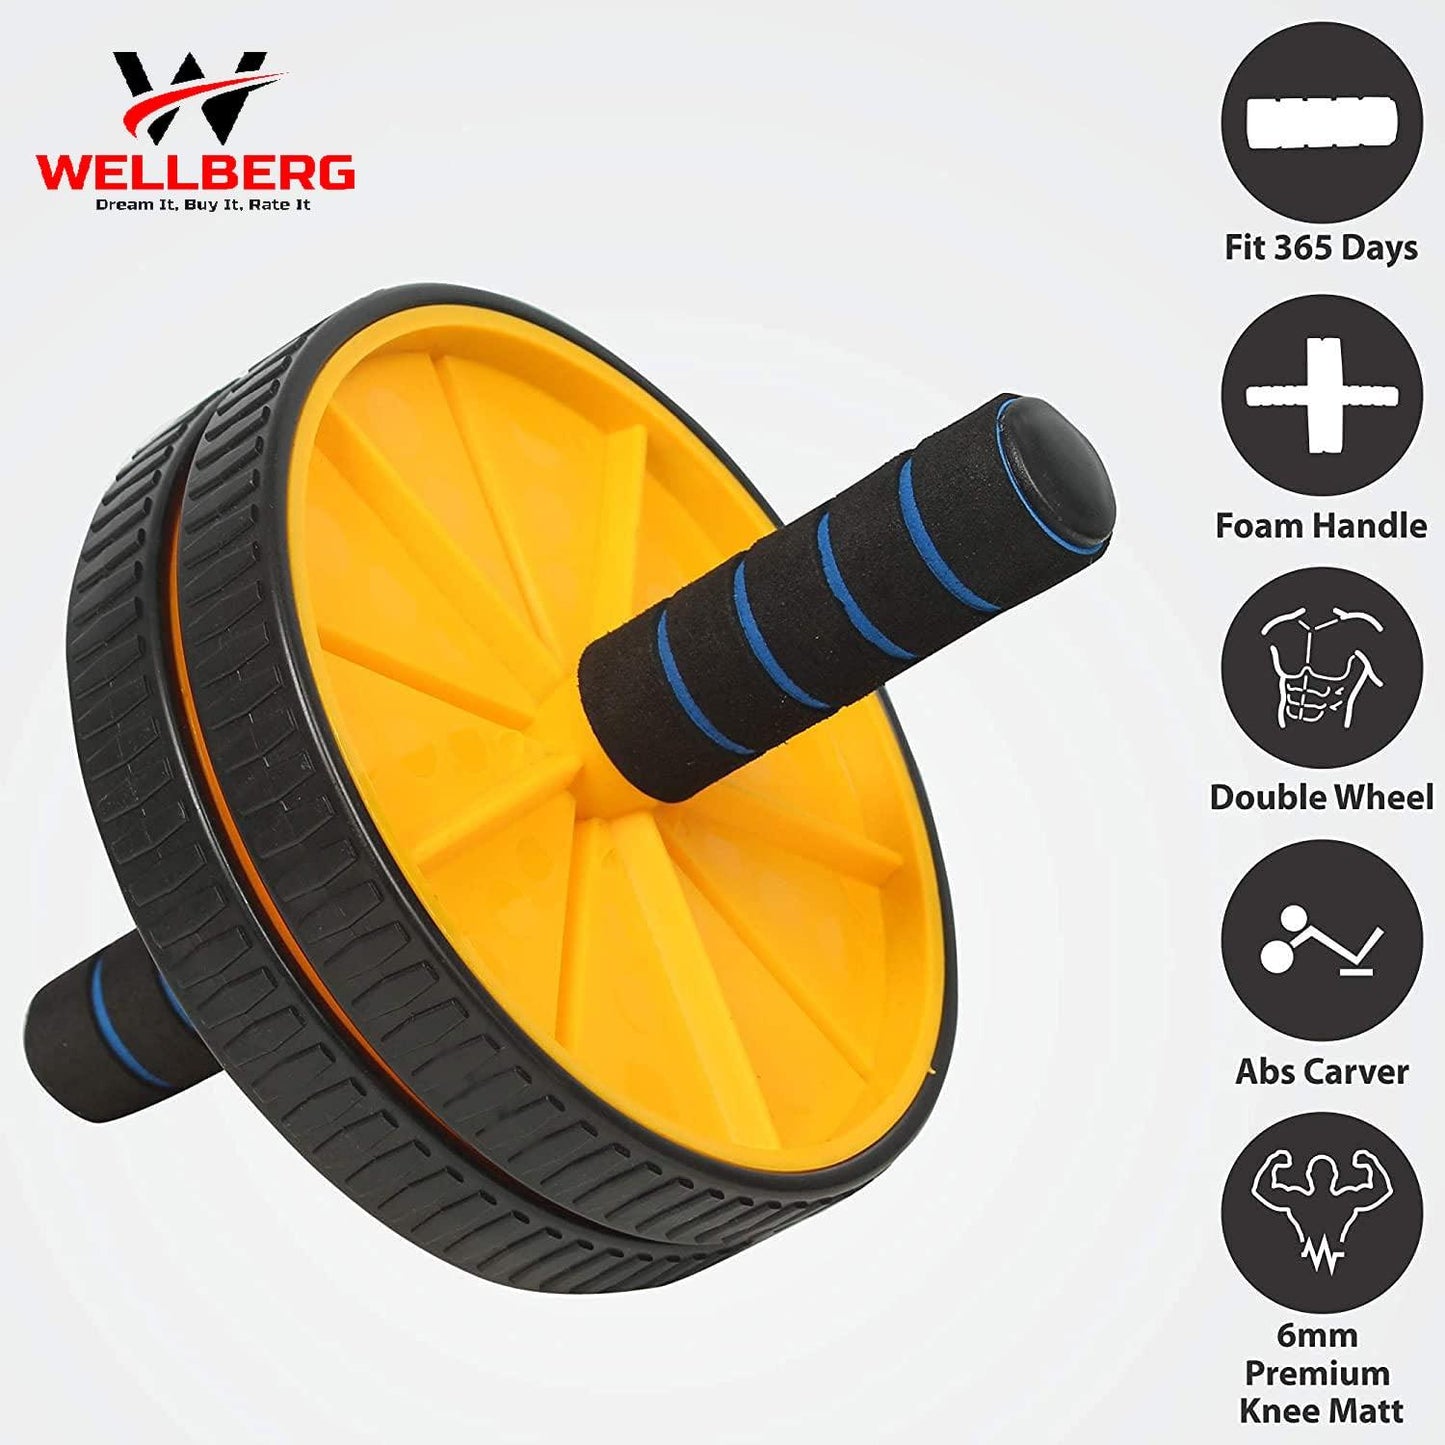 Wellberg Abs Roller Exercise Equipment, Wheel With Knee Mat for Home Gym, Machine Workout, Fitness, Exercise, Muscle Growth & Physical Therapy for Men & Women - WELLBERG